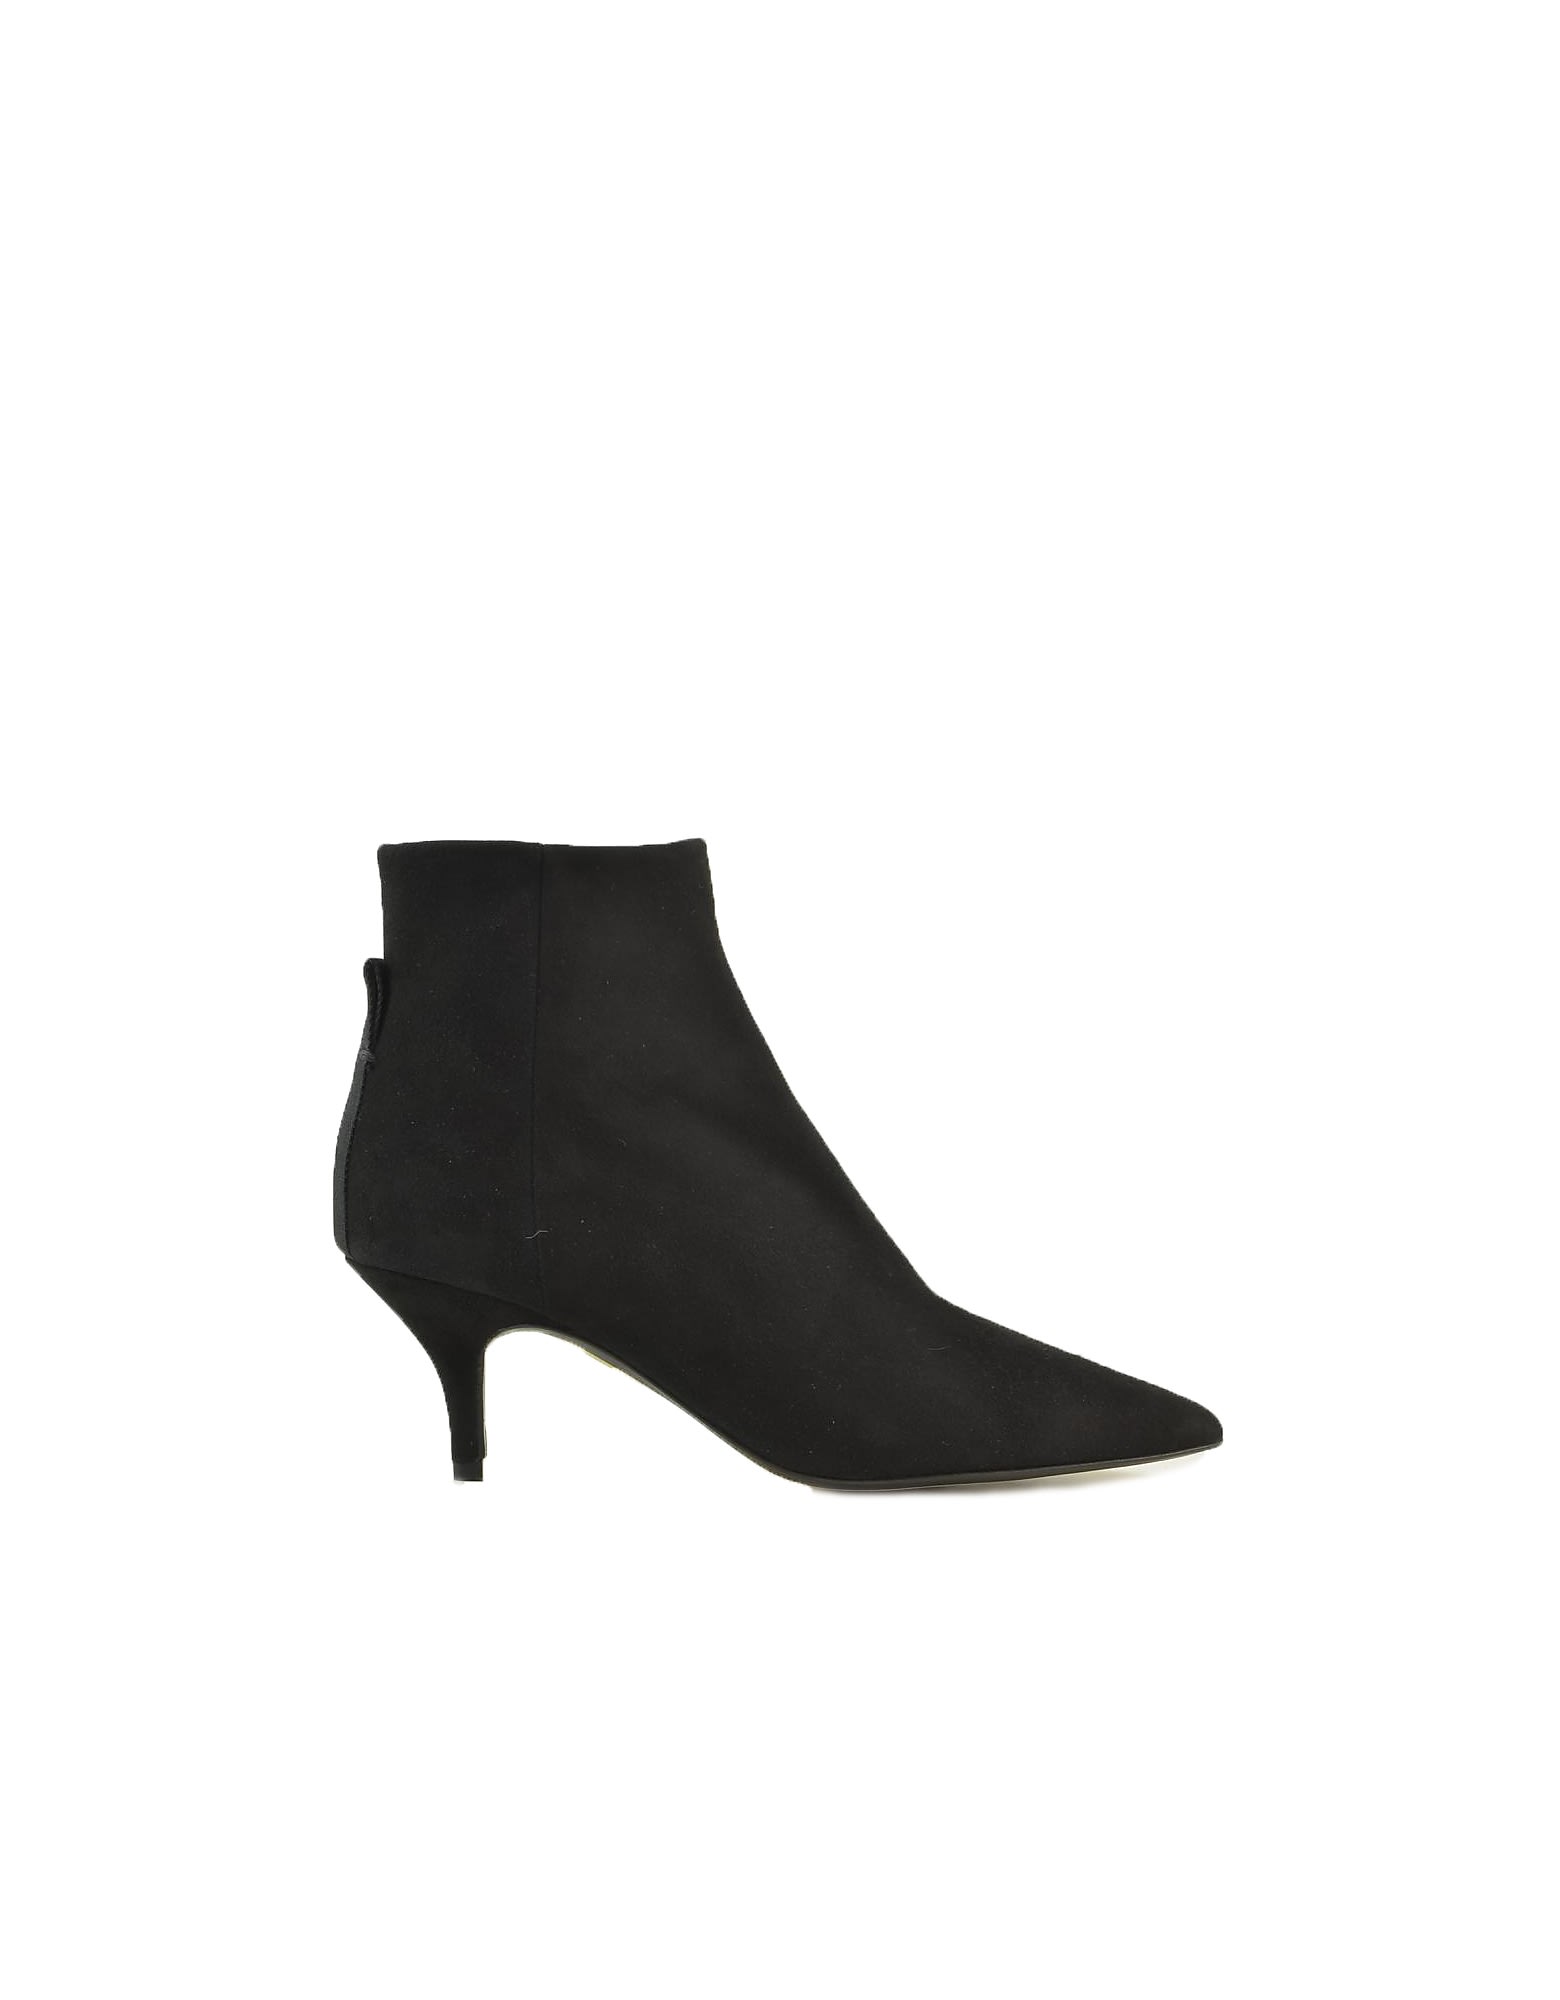 Joseph Black Suede Pointy Booties